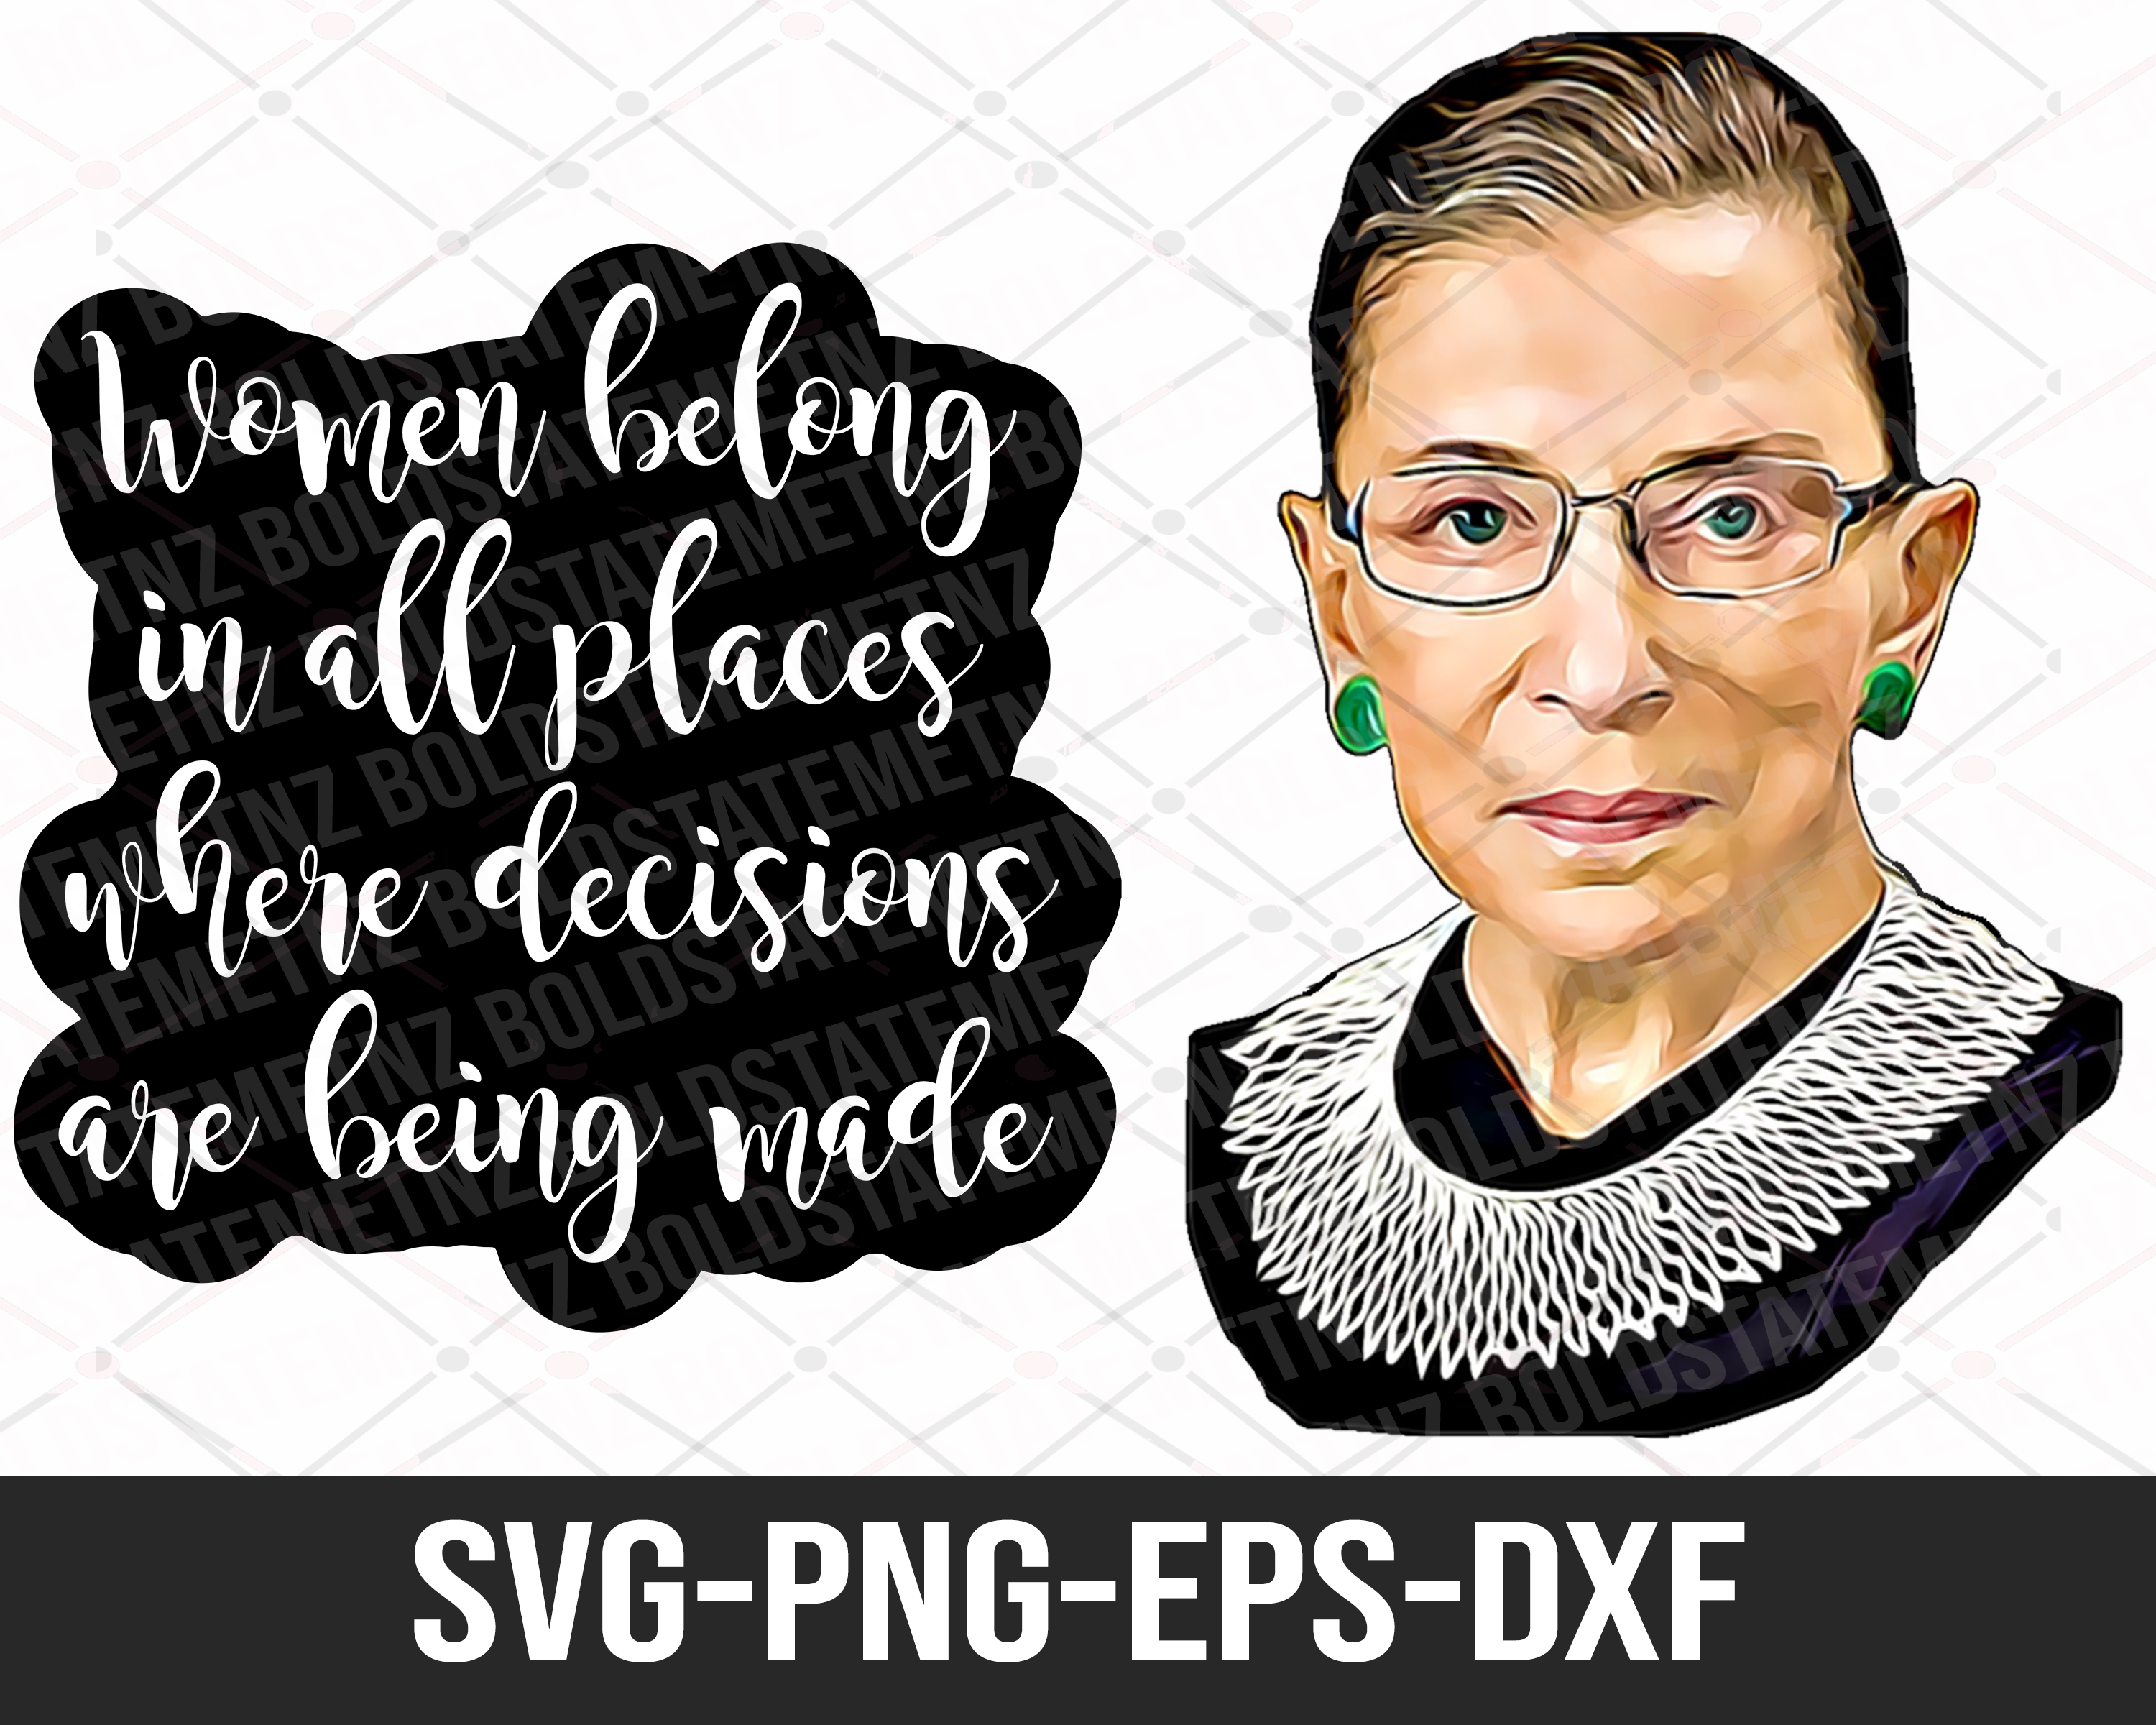 RBG SVG | Women Belong in All Places Where Decisions Are Being Made SVG | Feminist Sayings | Ruth Bader Ginsburg | Protest | Dissent